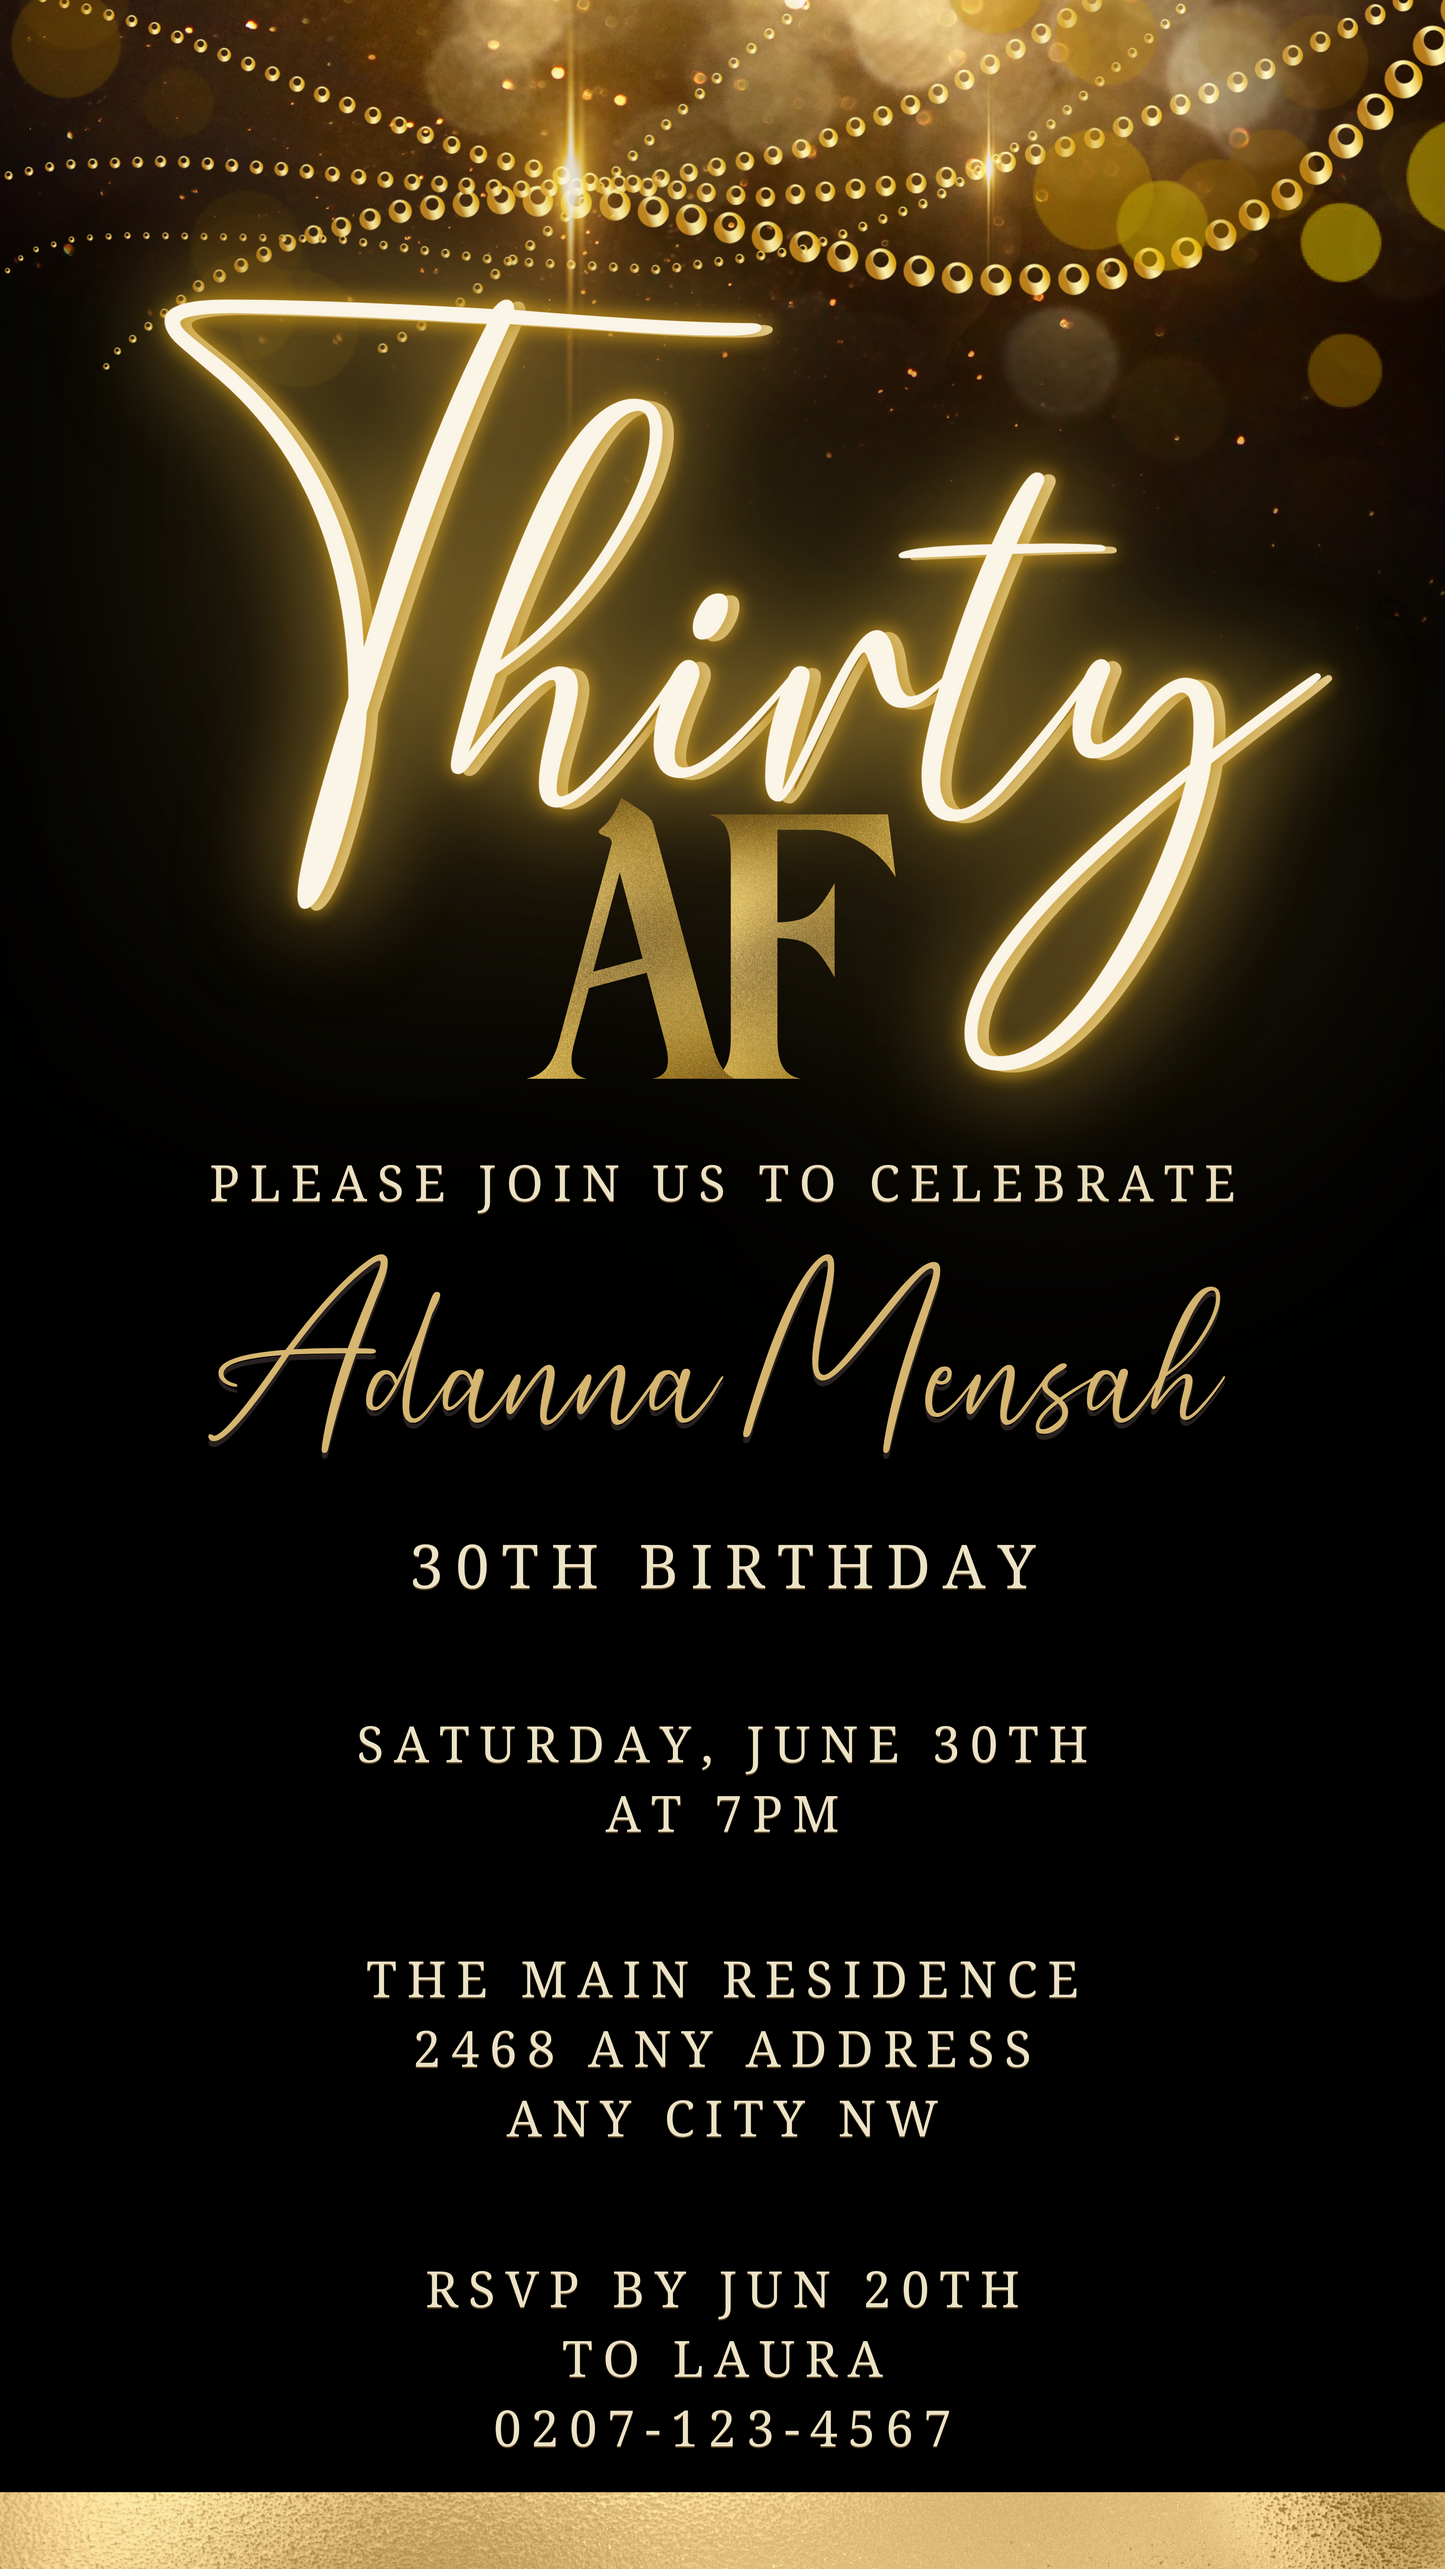 Customisable Black Gold Neon Sparkle 30AF Birthday Evite with elegant gold text on a black background, perfect for digital invitations via WhatsApp and other platforms.